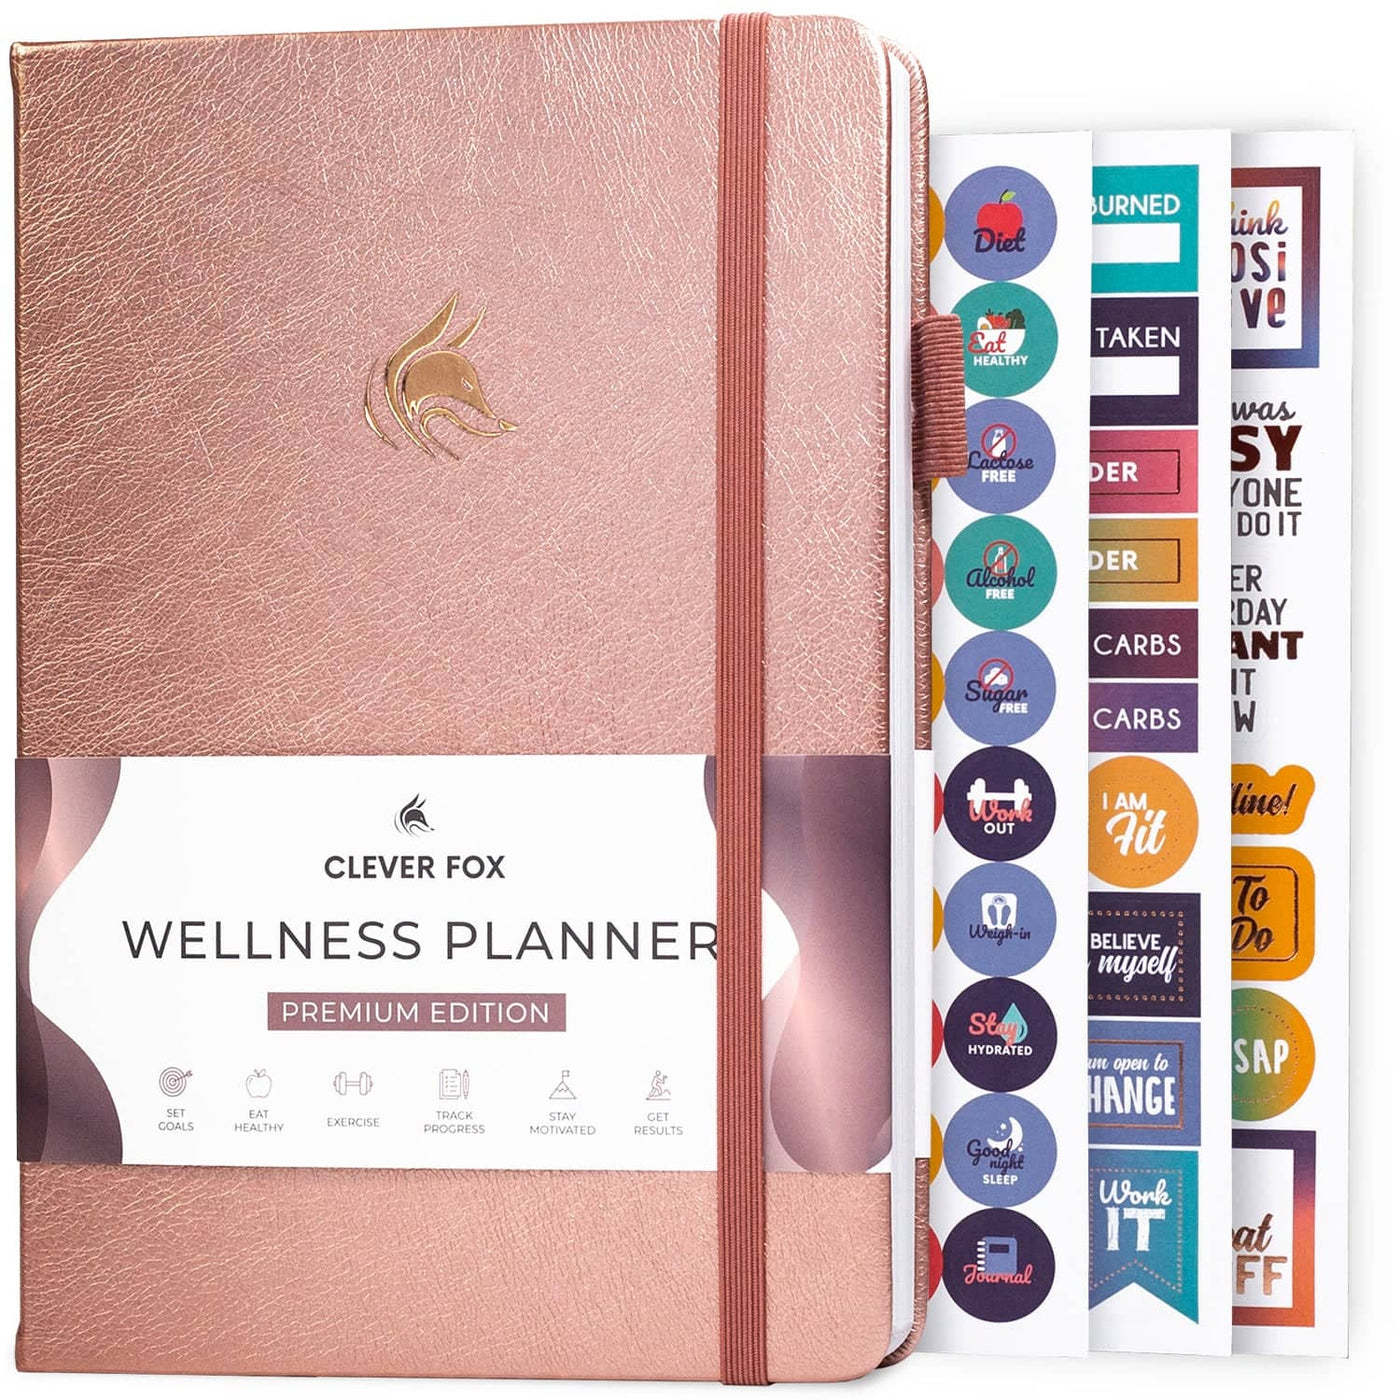 Clever Fox clever Fox Fitness Journal Workout Log Book Bundle - 2